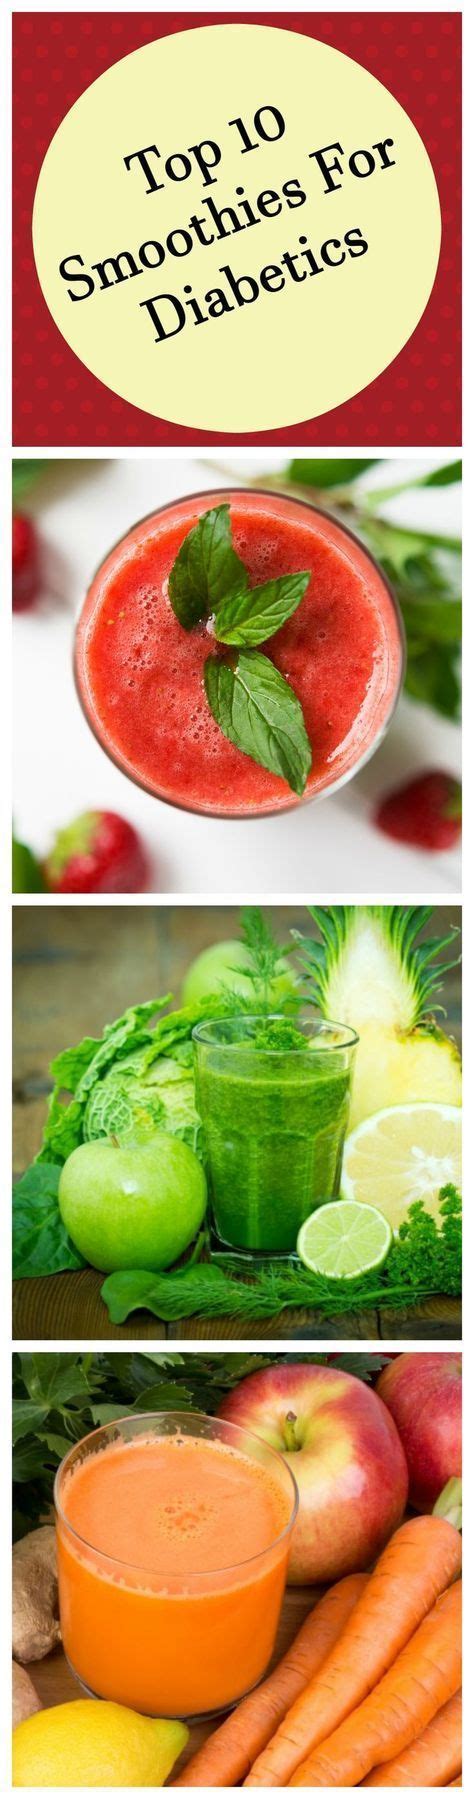 — about — sitemap — contact juicer recipes — juicing for weight loss — benefits of juicing question: 10 Delicious Smoothies for Diabetics | Diabetic smoothie ...